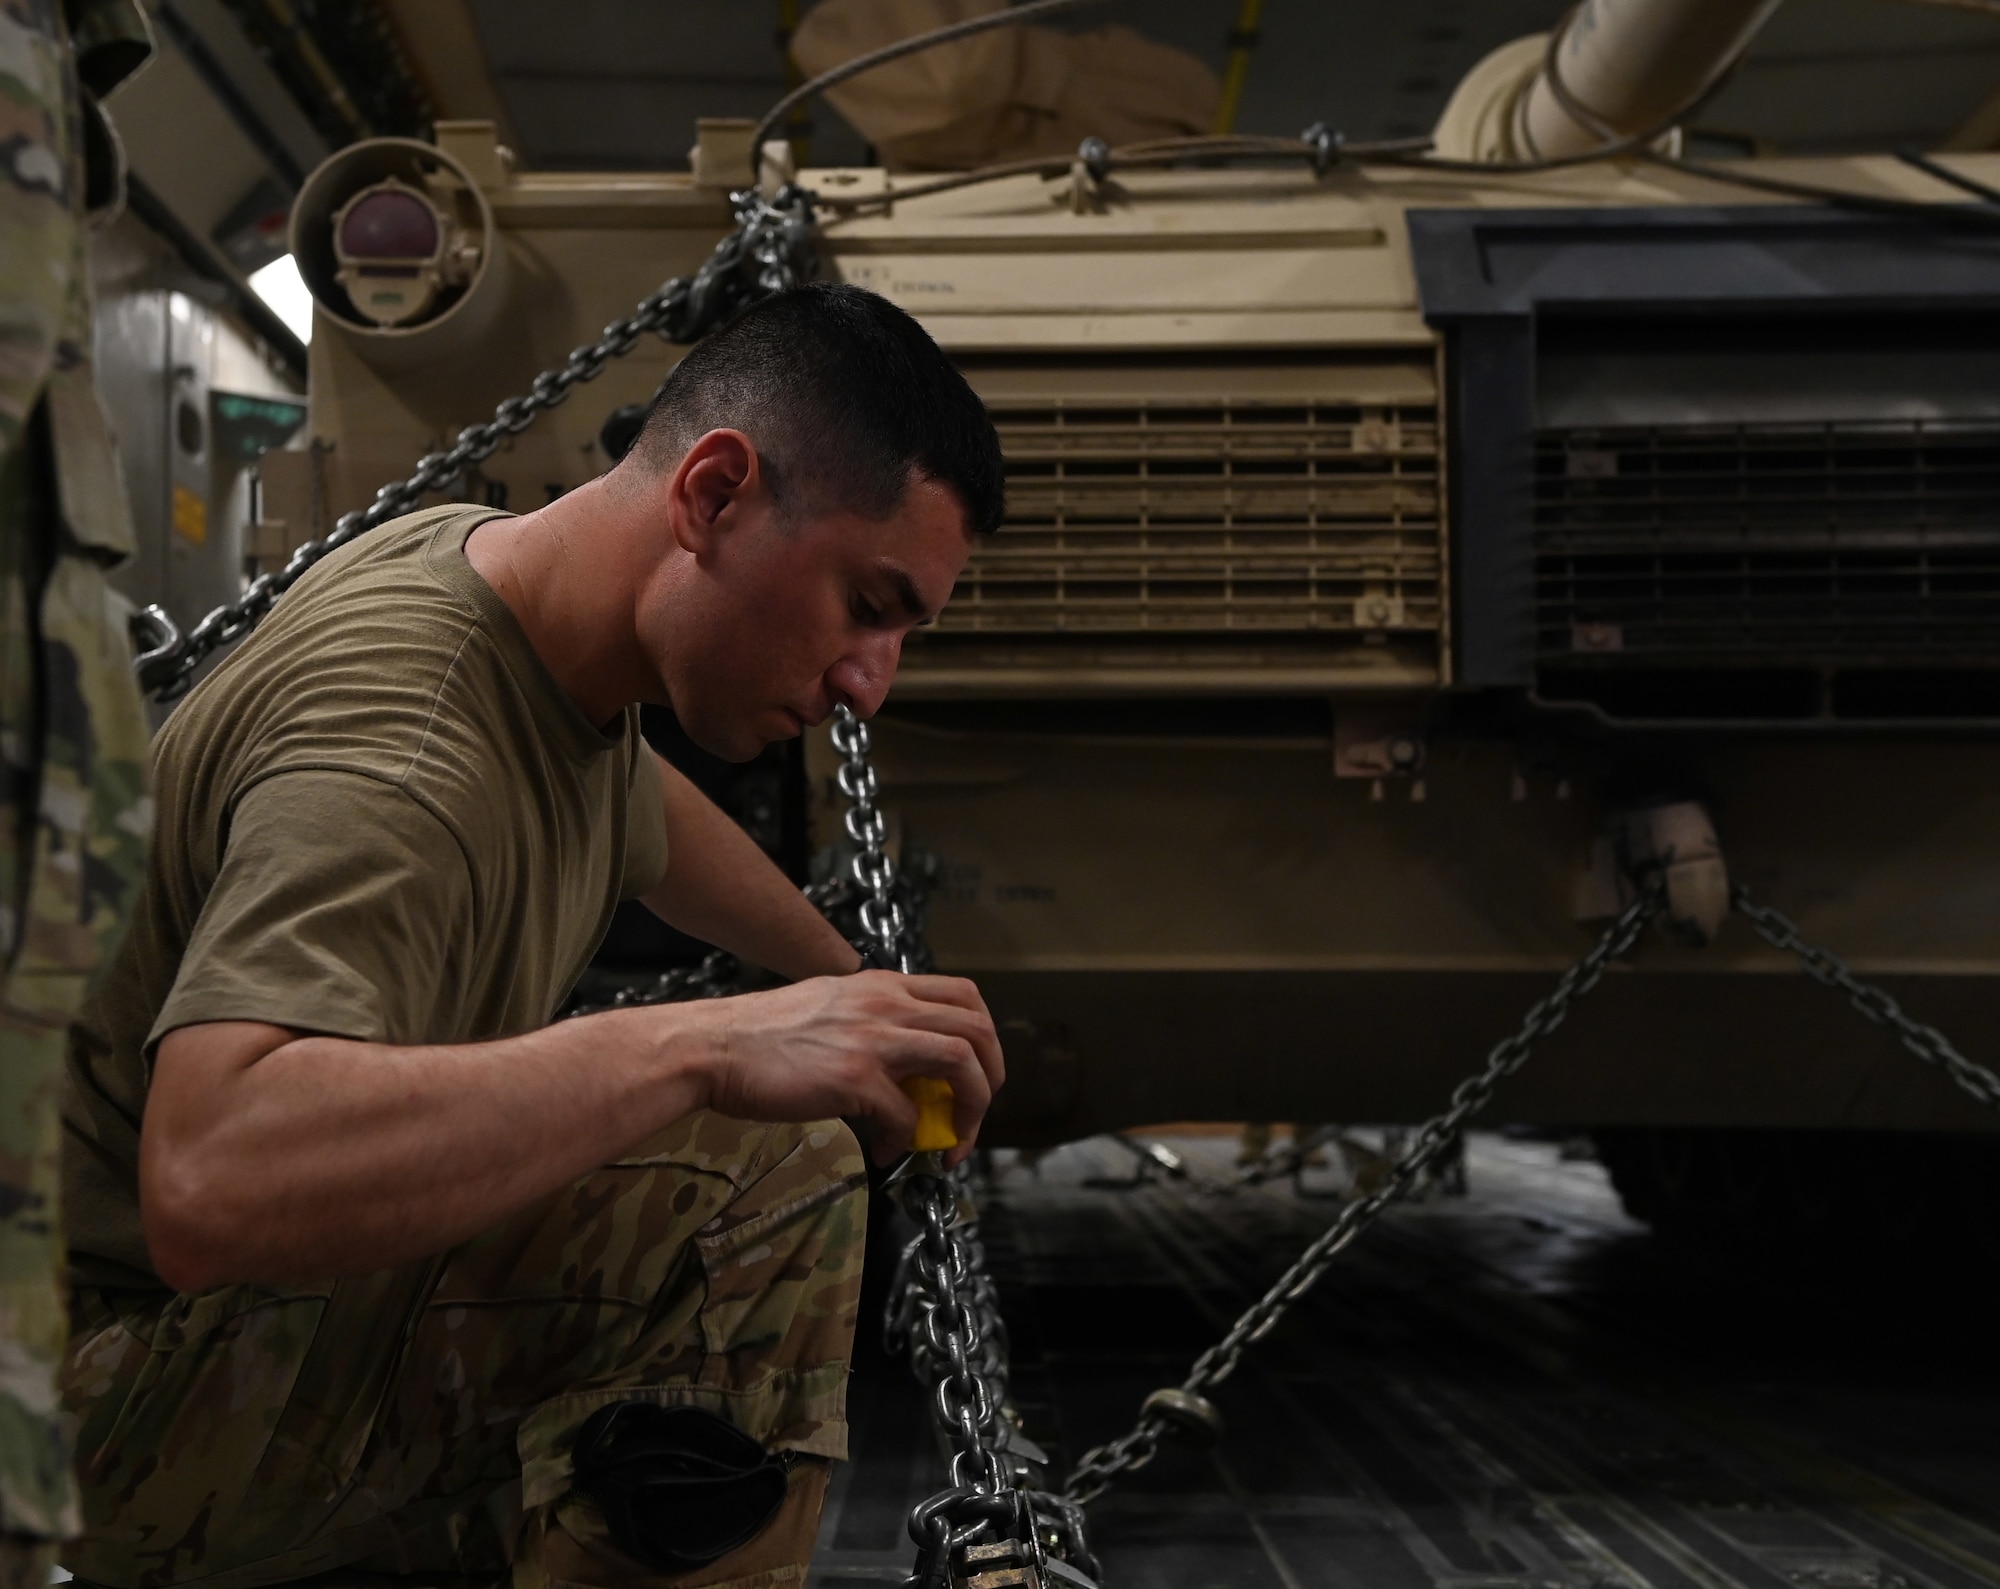 U.S. Air Force Tech. Sgt. Jose Cardoza, an 816th Expeditionary Airlift Squadron loadmaster, measures the length and angle of a chain securing an M-1/A2 Abrams main battle tank Aug 27, 2022 at Ali Al Salem Air Base, Kuwait. Loadmasters thoroughly scrutinize every chain to ensure the angles and placement provide proper restraint to keep the tank secured during flight. (U.S. Air National Guard photo by Master Sgt. Michael J. Kelly)